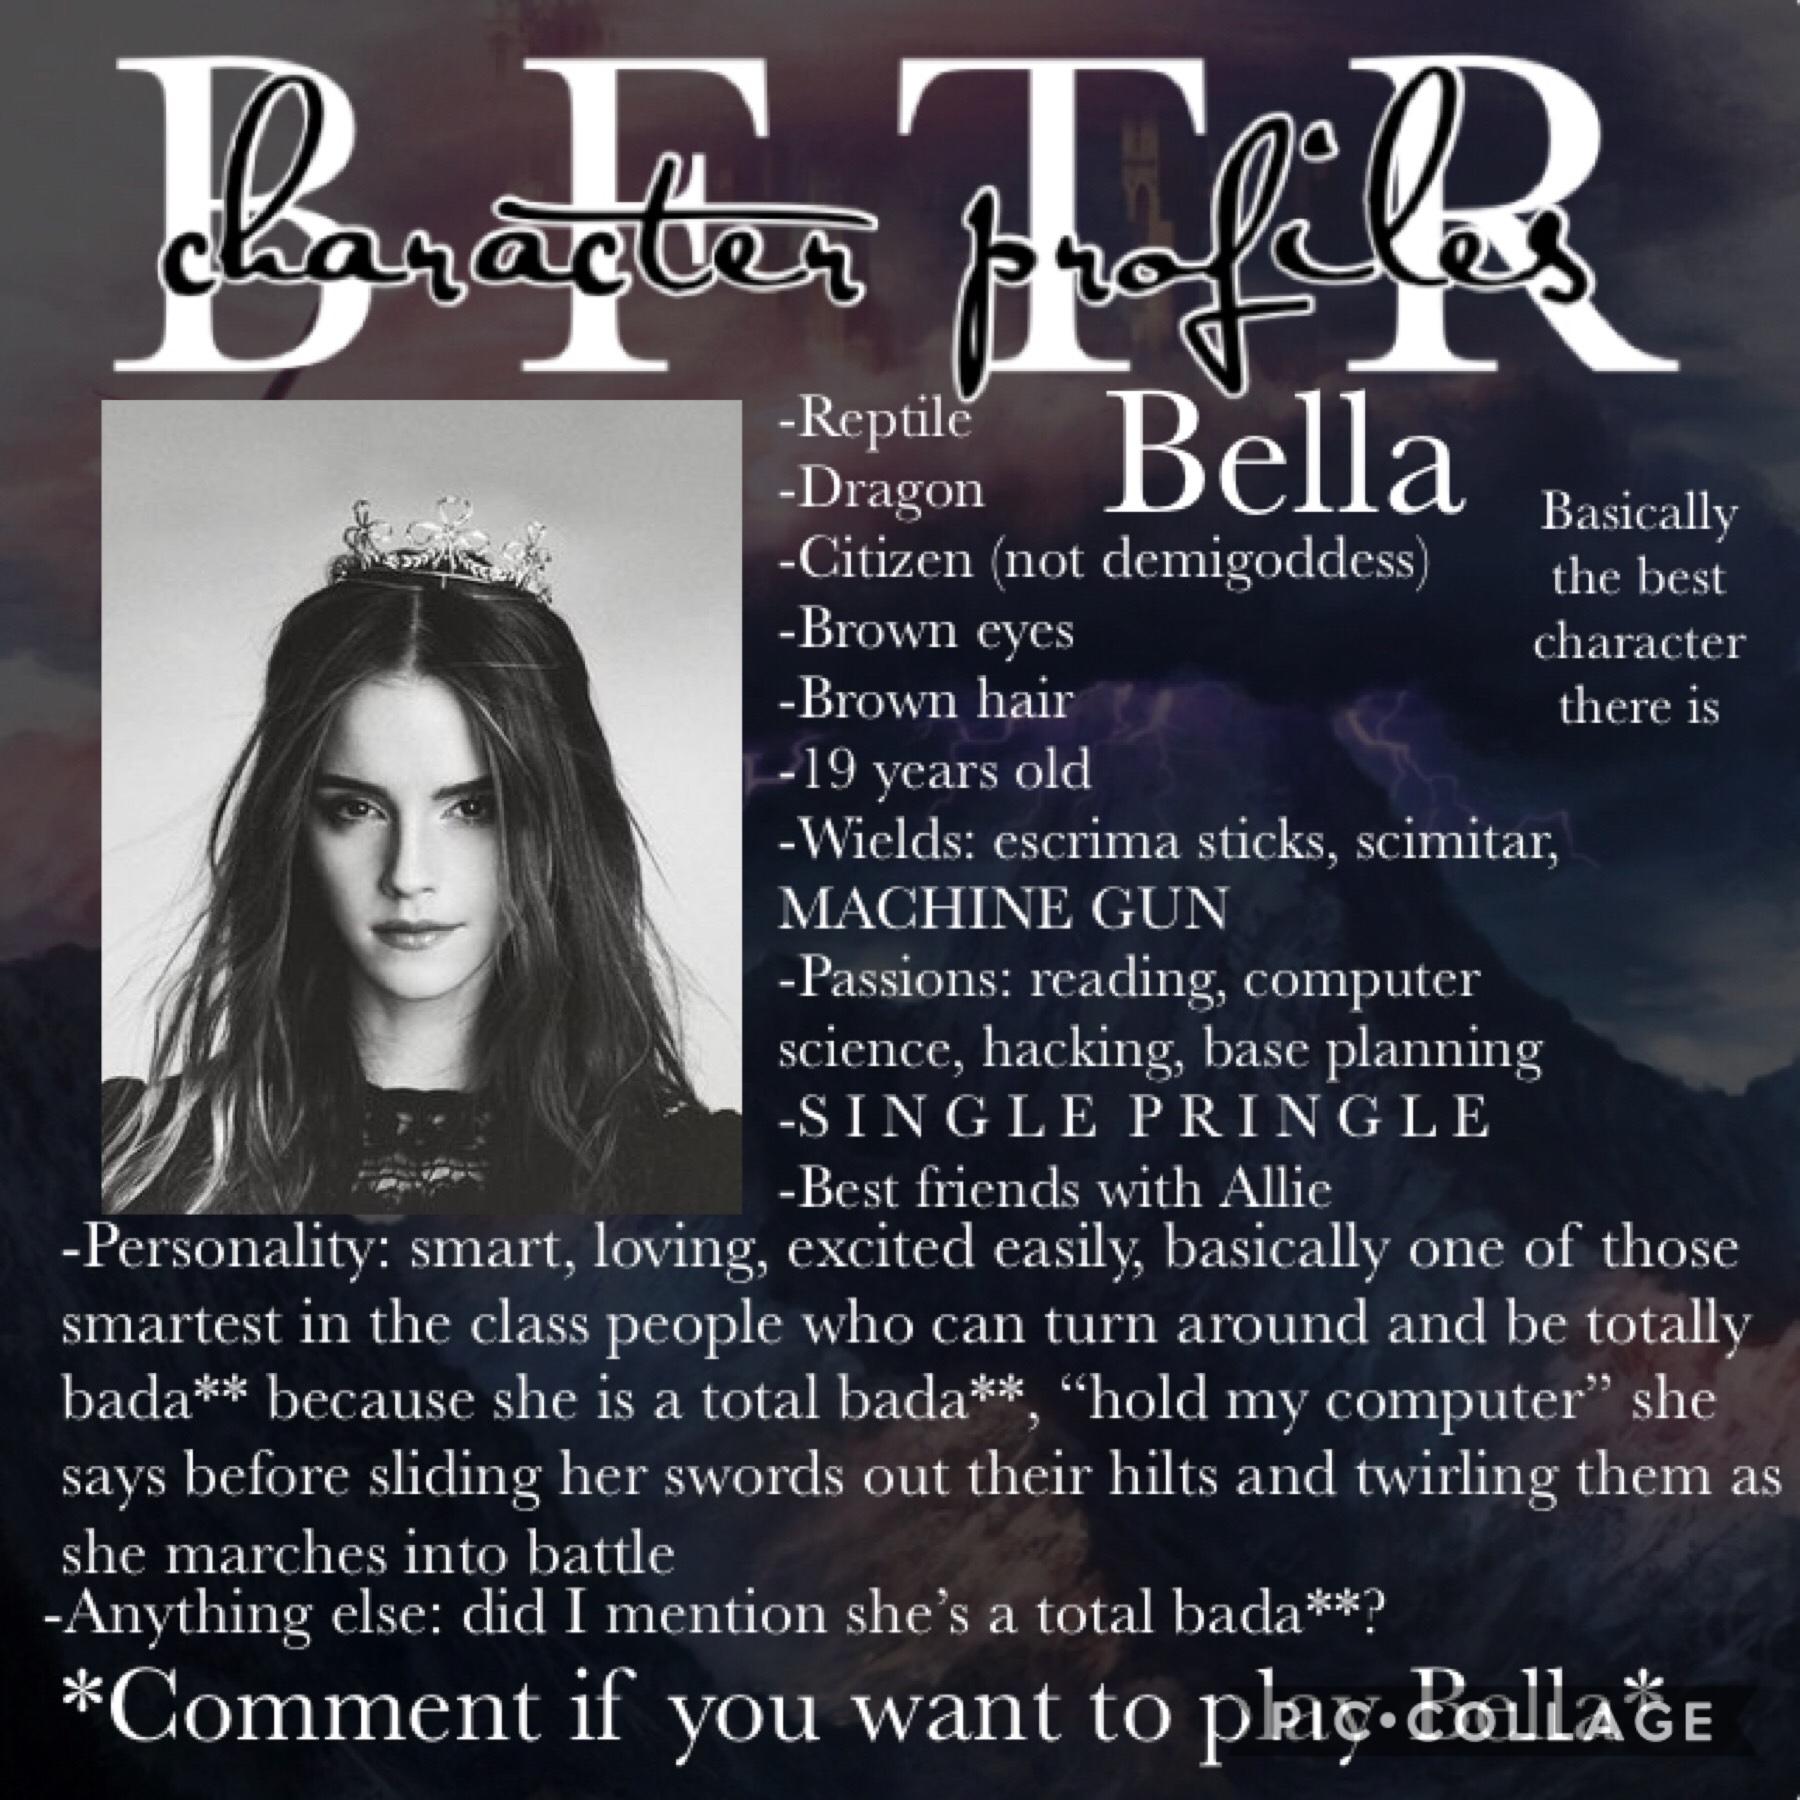 🖤COMMENT TO PLAY THE BEST CHARACTER, BELLA🖤